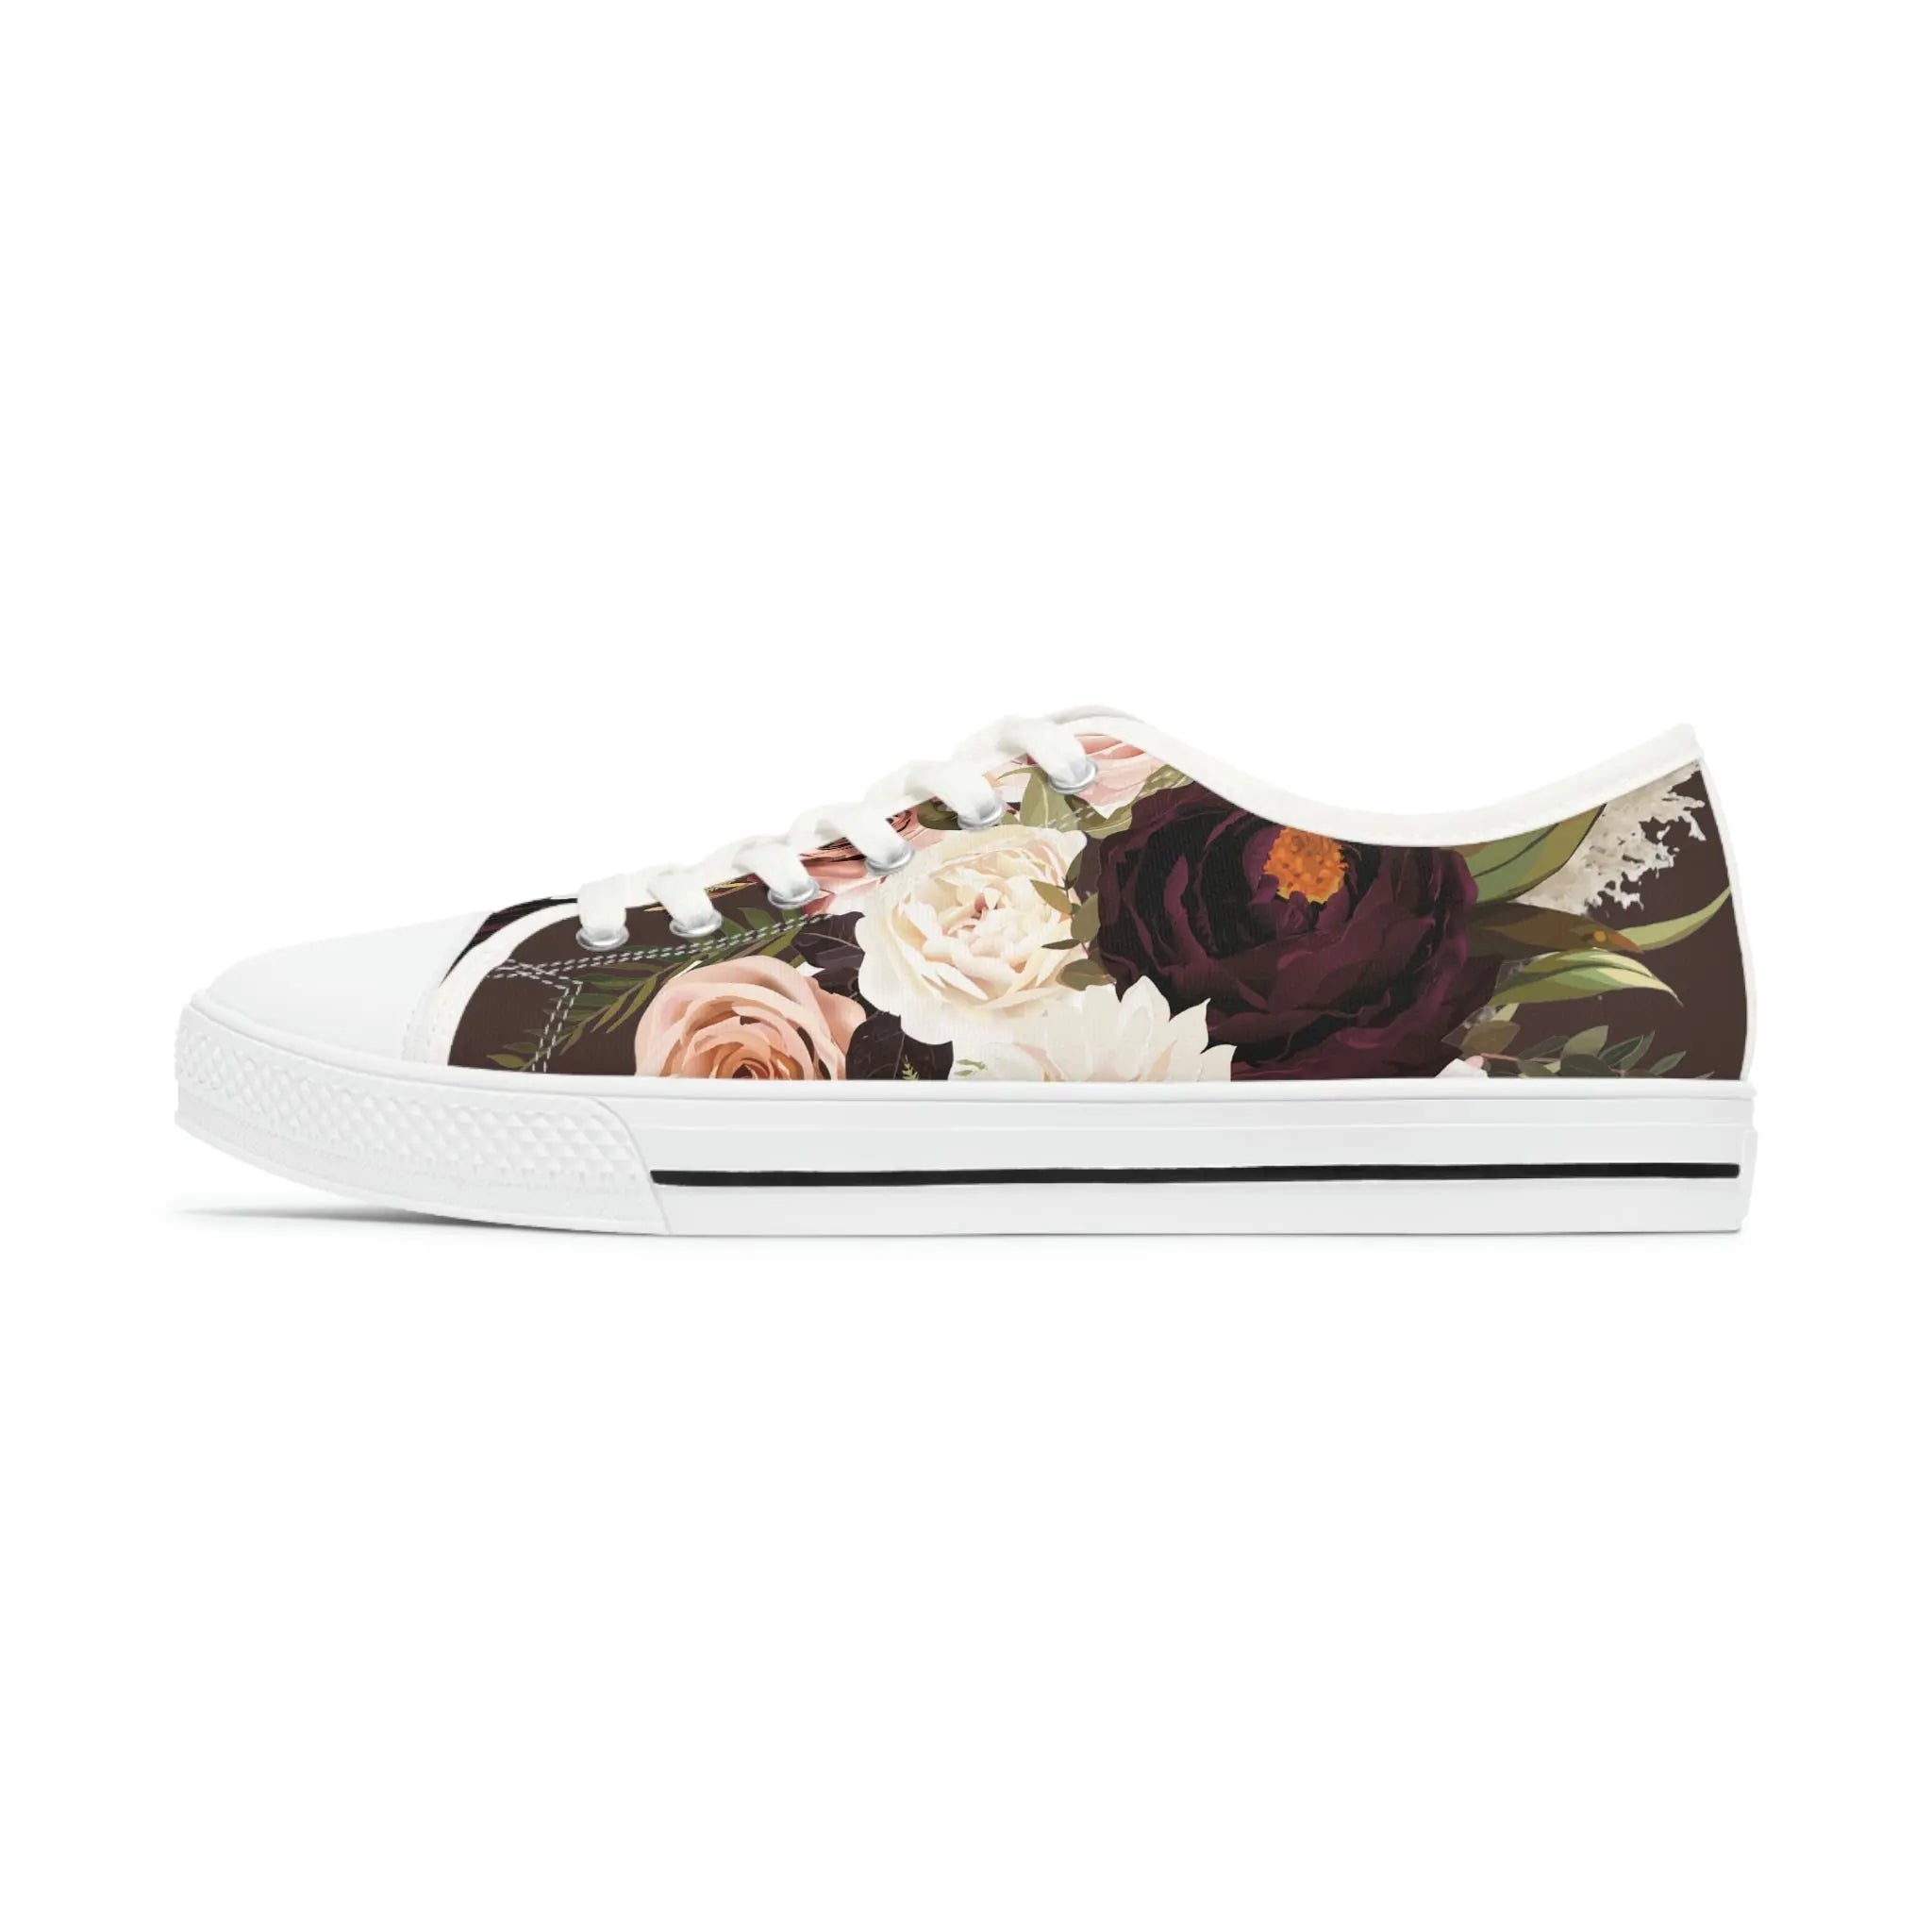  BOHO STAY WILD (Dark Bloom on Brown) Women's Low Top White Canvas Shoes Shoes